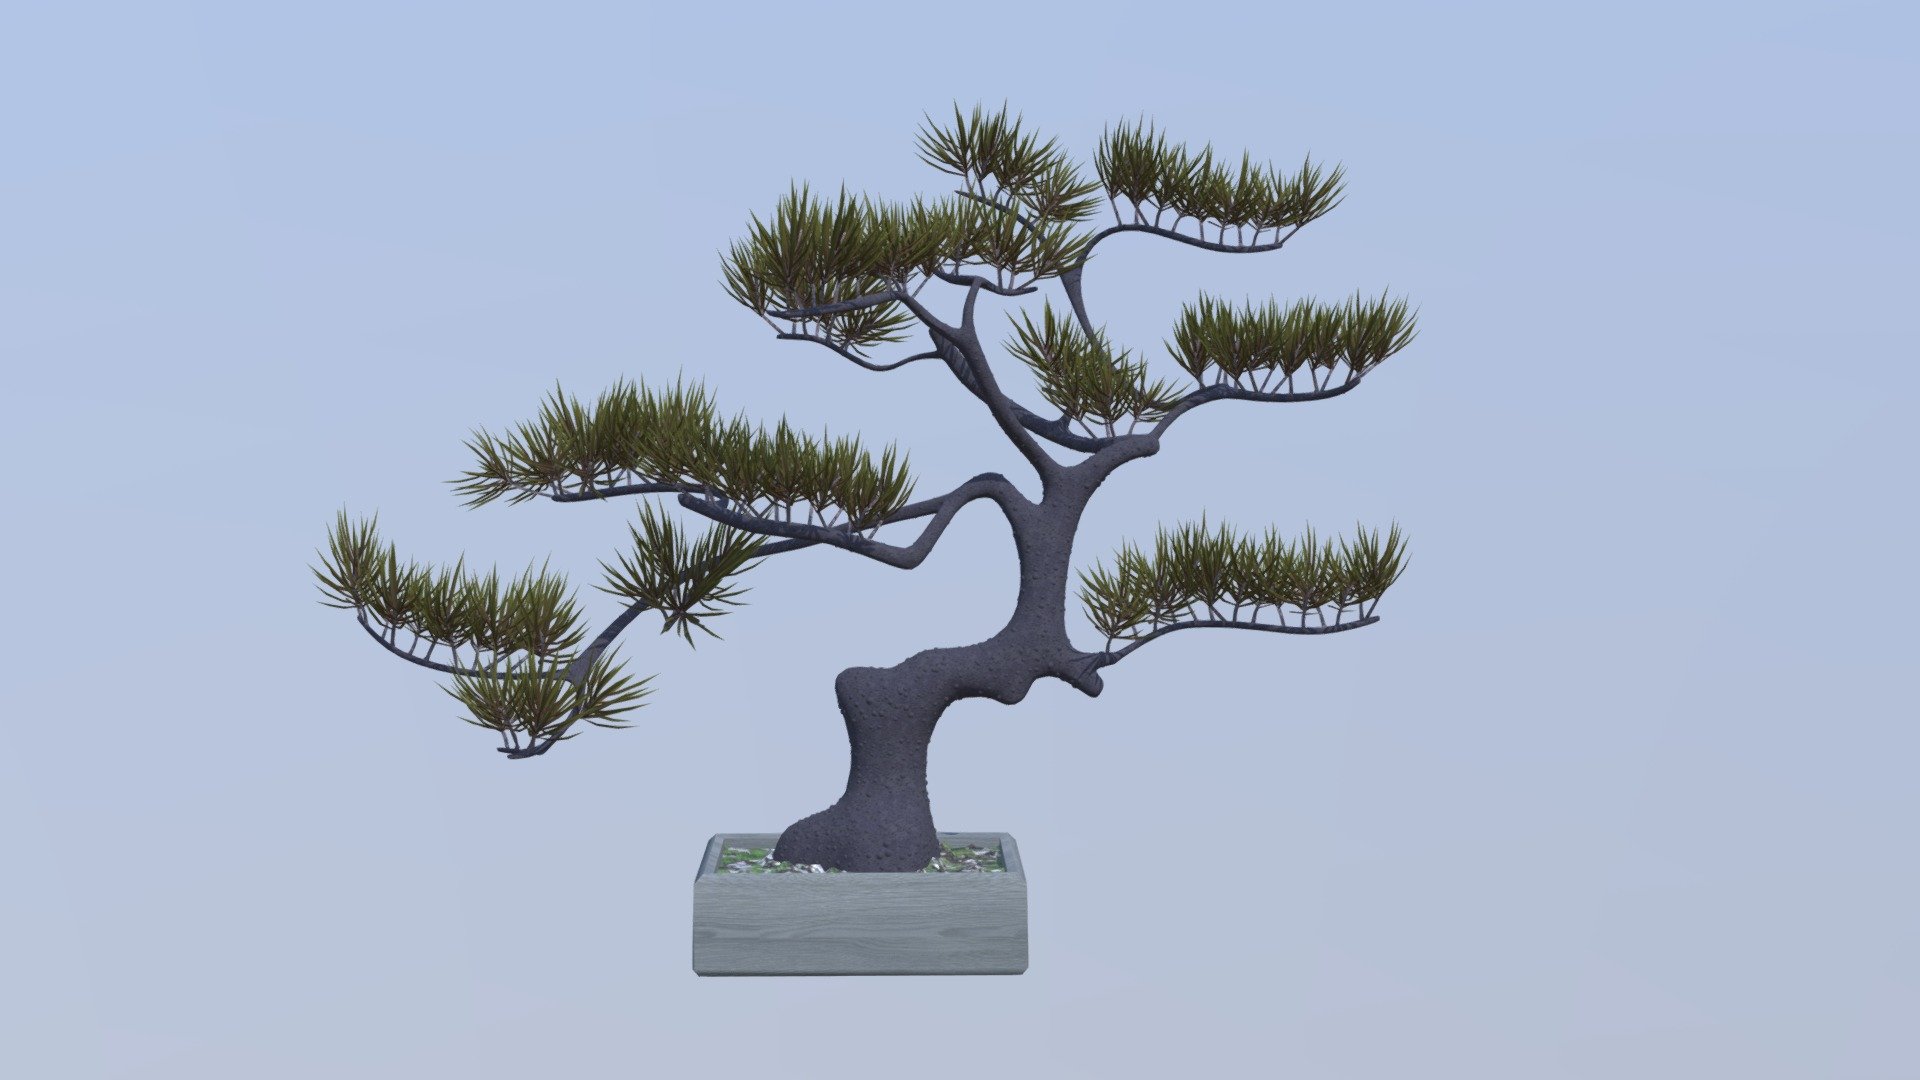 Bonsai tree created with 3ds max for detailed interior rendering
Ideal for japanese style interior or as a design element.

Created in 3ds Max, several formats available 3d model